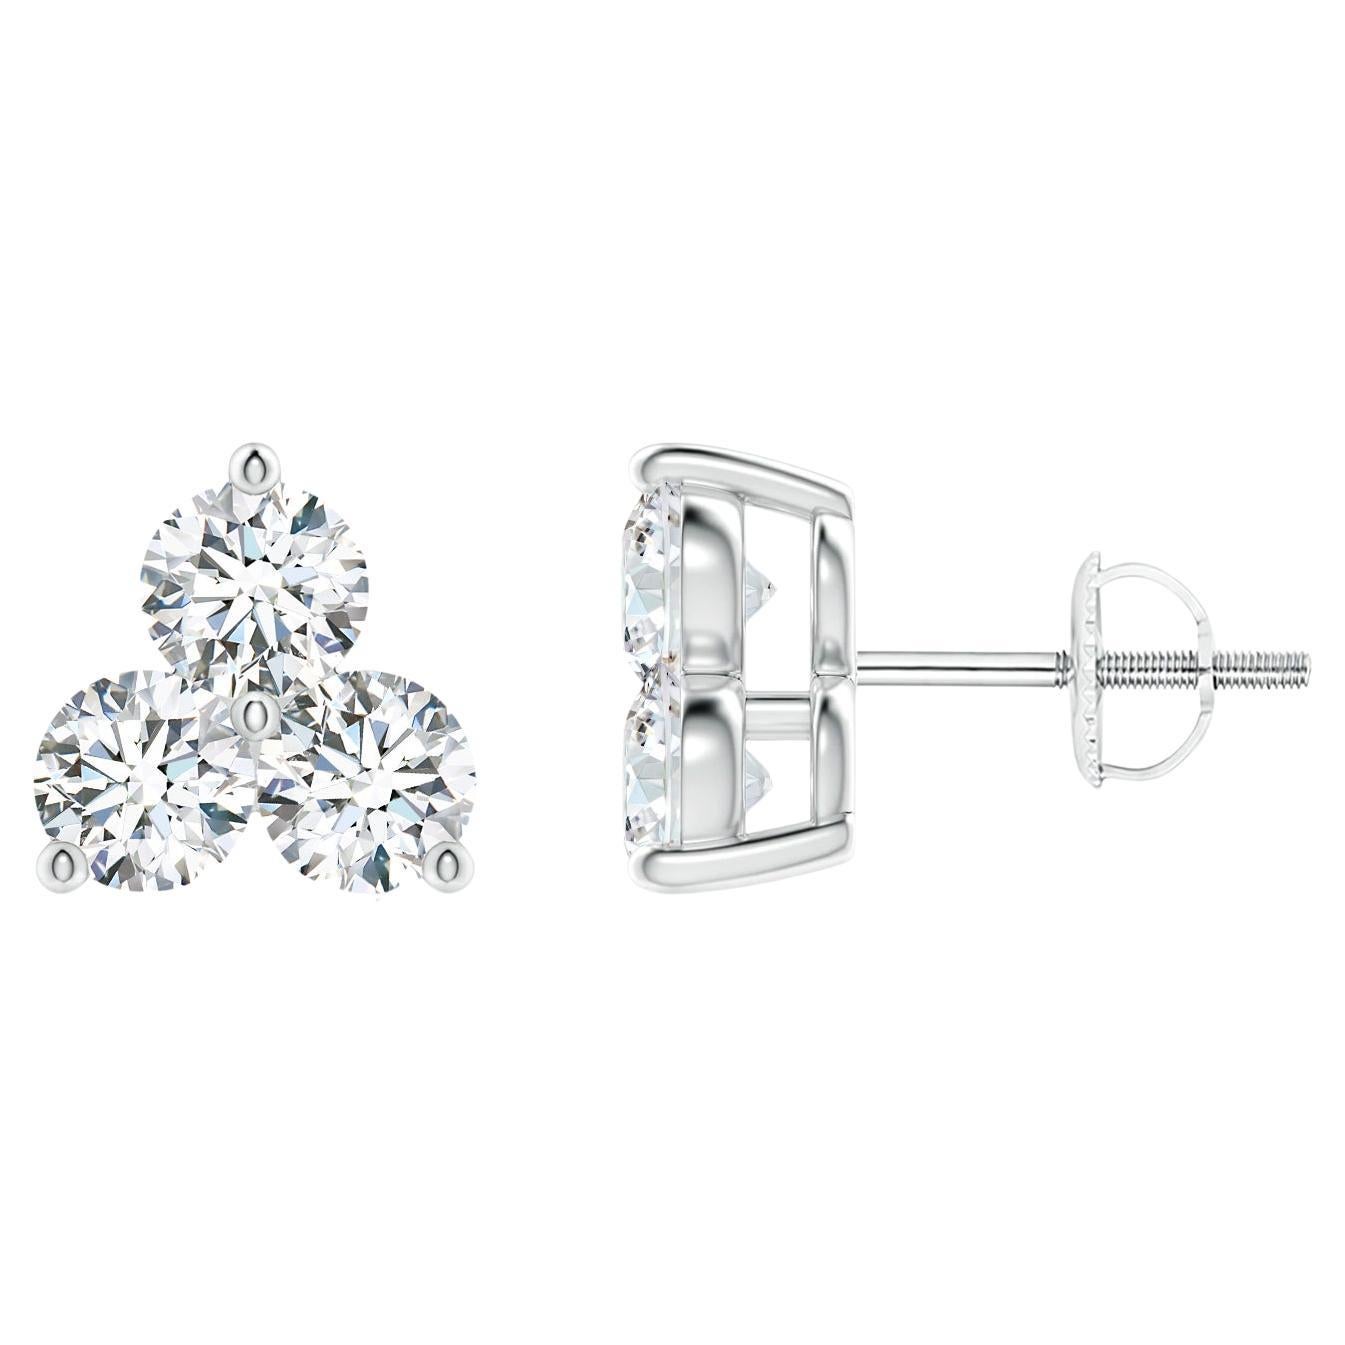 Natural Diamond Stud Earrings in 14K White Gold (1cttw  Color-G  Clarity-VS2) For Sale